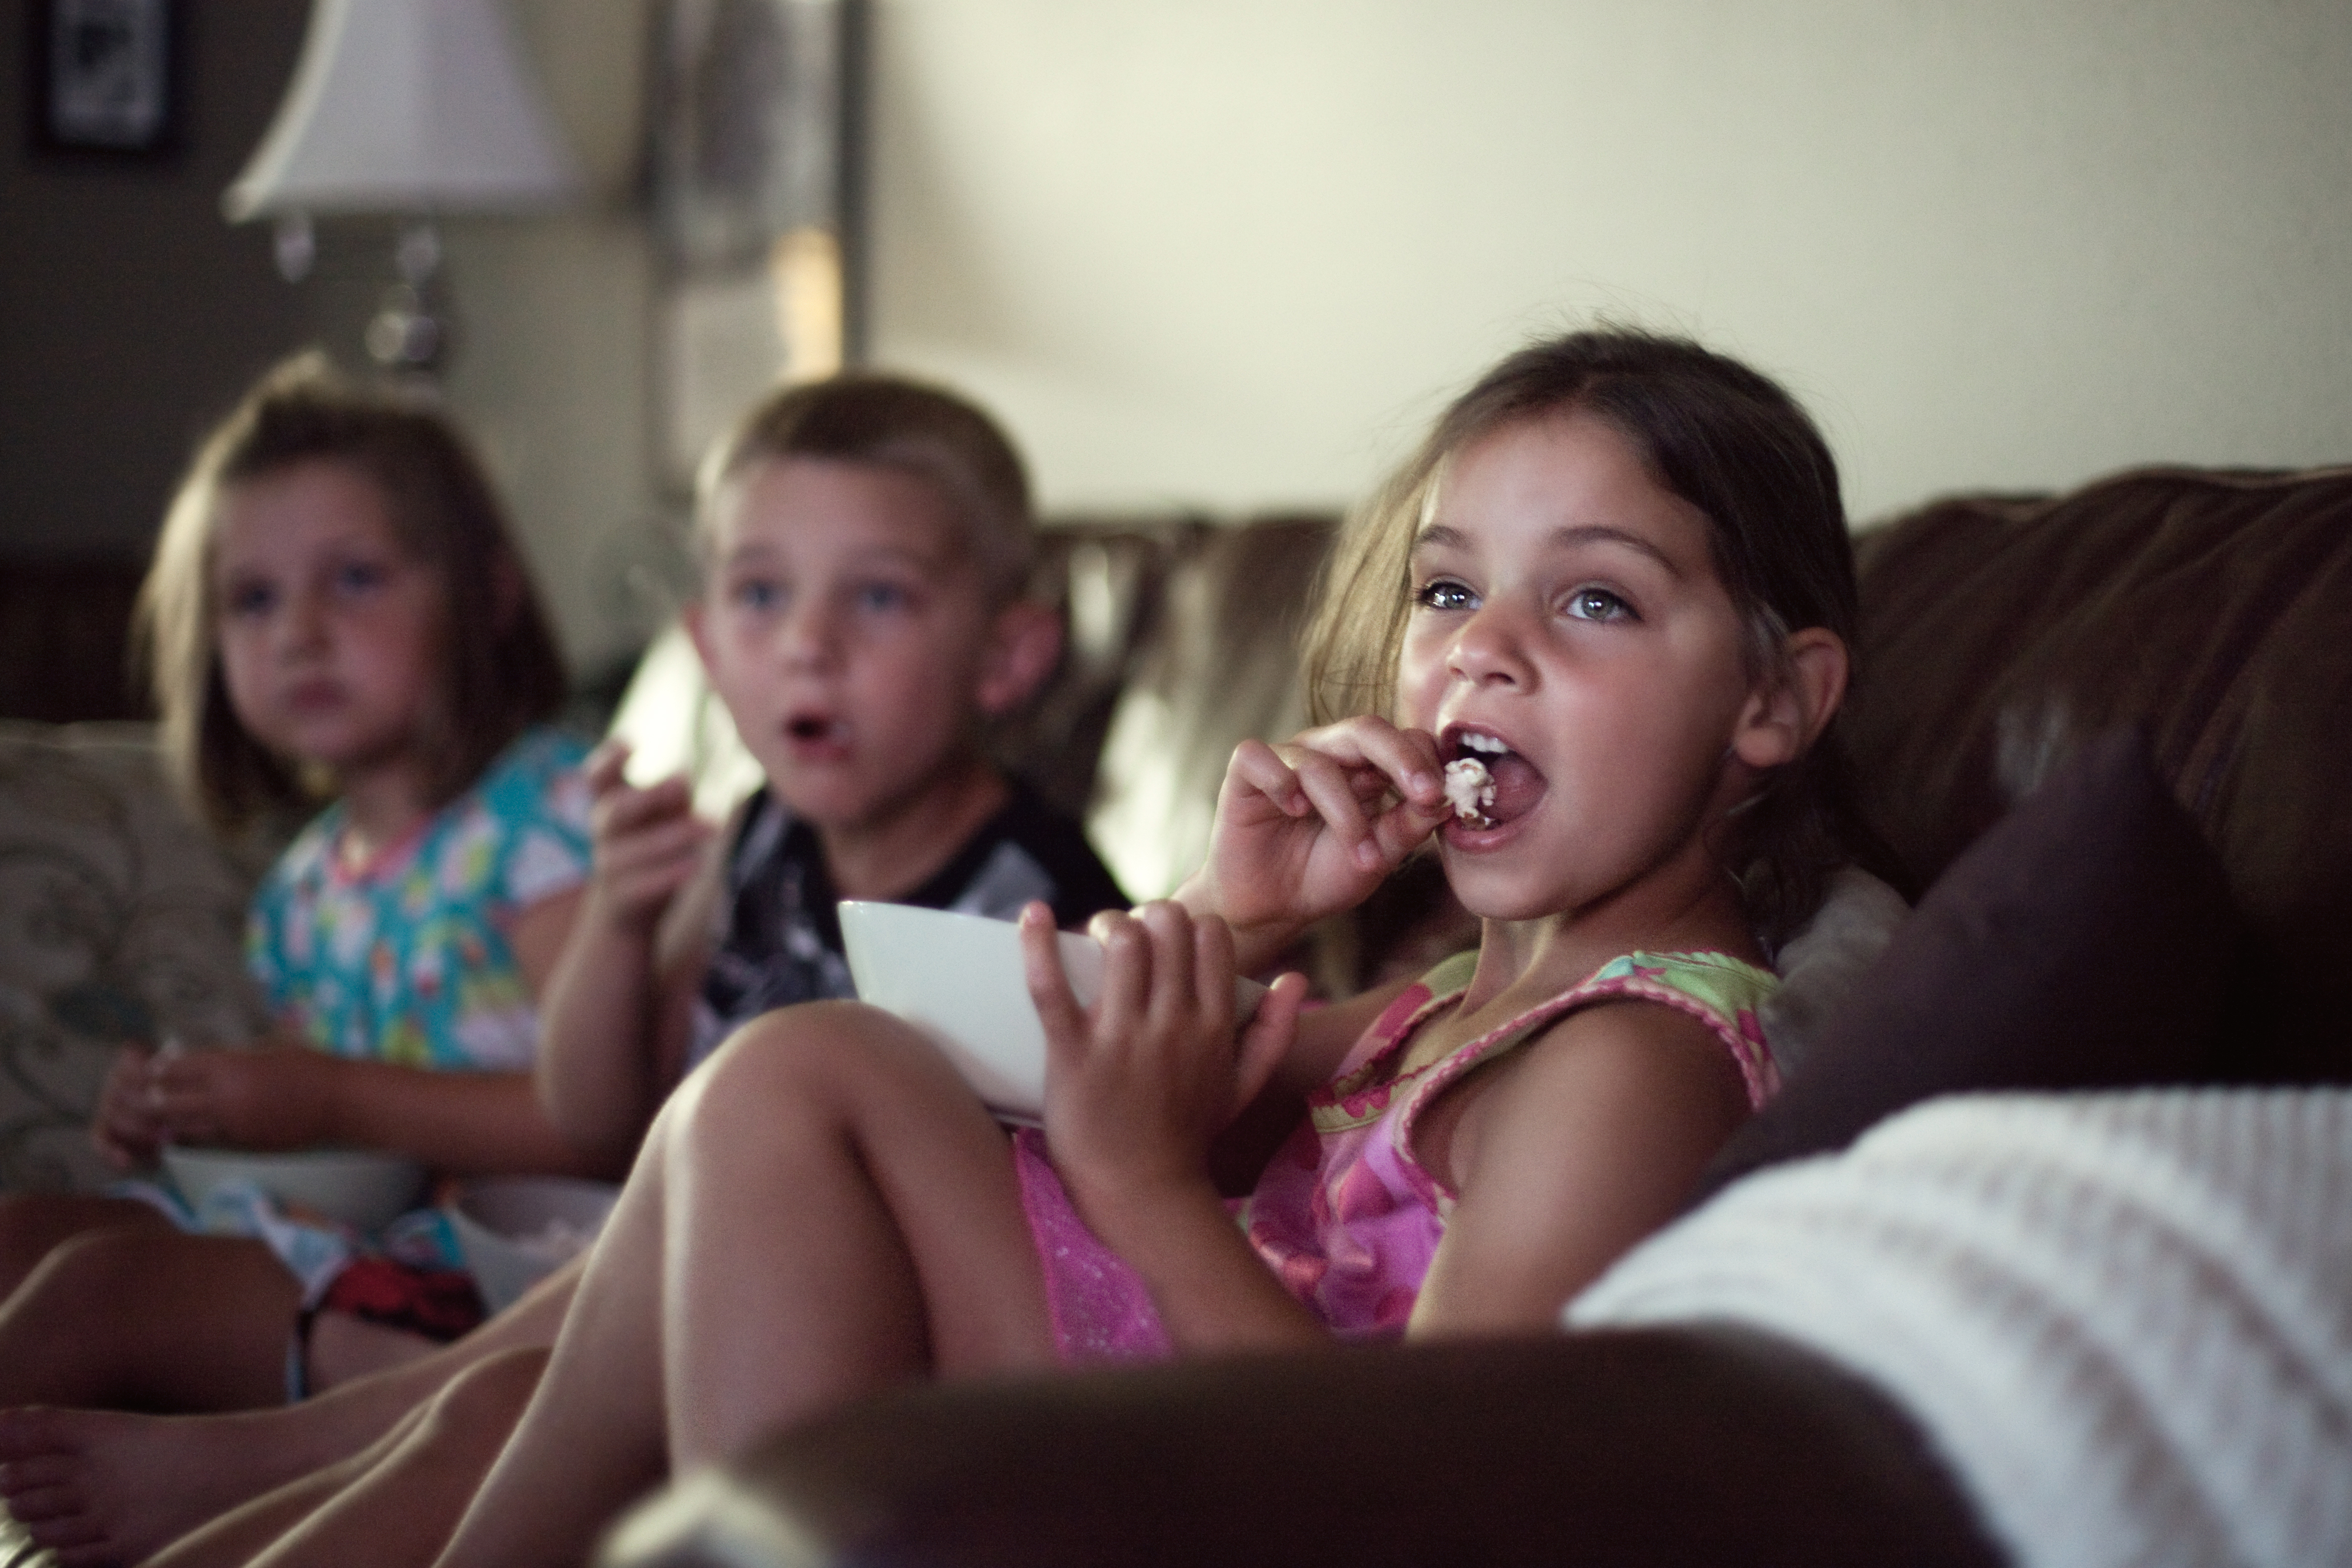 Three children sitting on a couch, engrossed in watching TV, one eating a snack